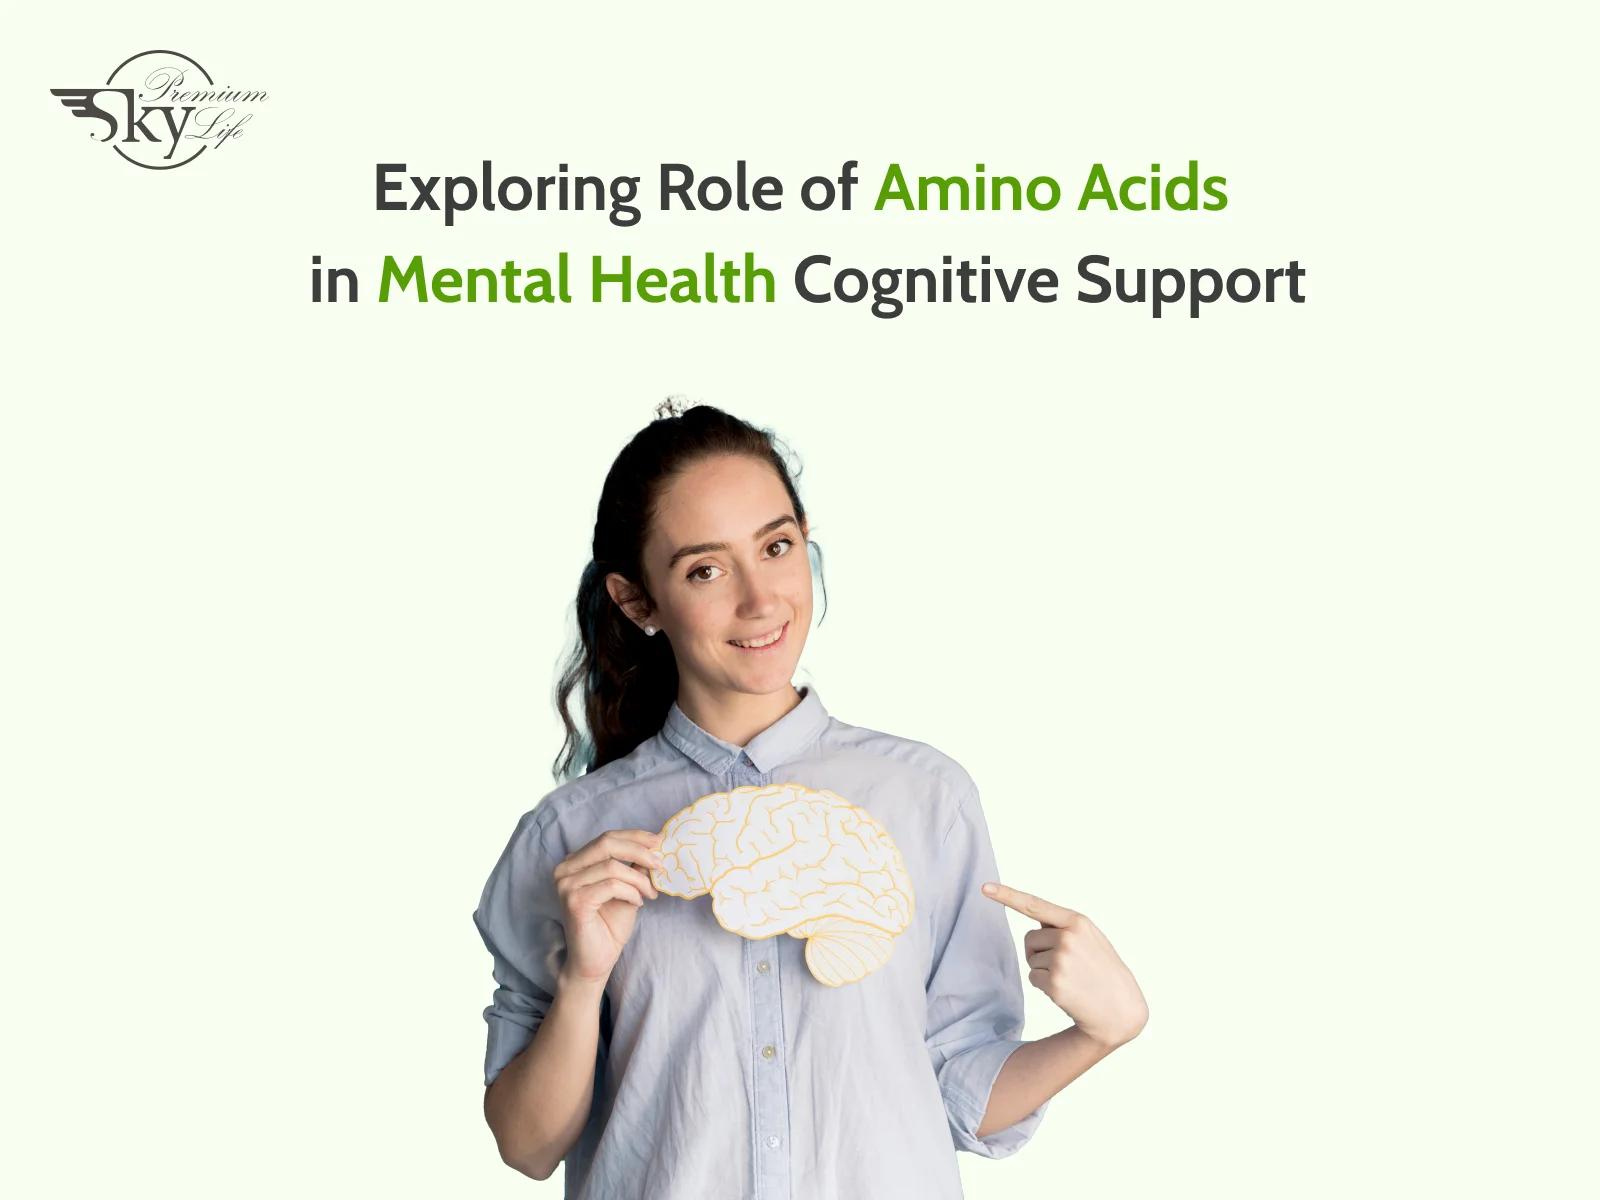 Exploring the Role of Amino Acids in Mental Health Cognitive Support